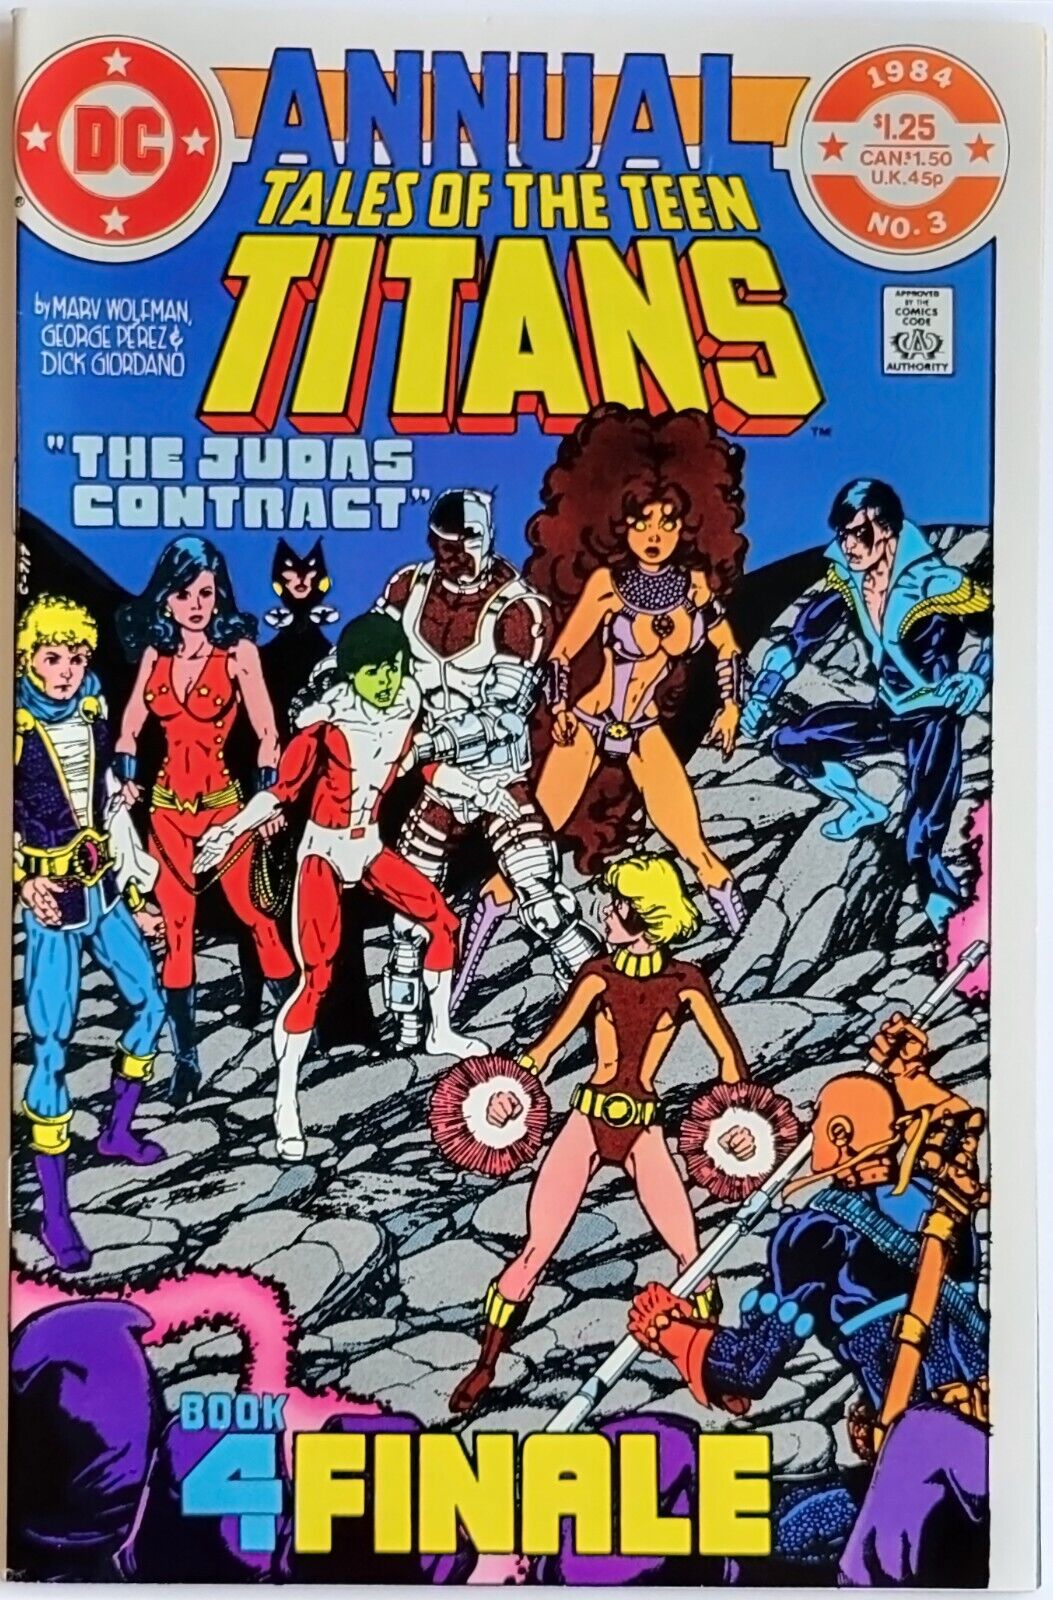 Tales of the Teen Titans Annual #3 (1984) Key 2nd App. of Nightwing, Terra Death